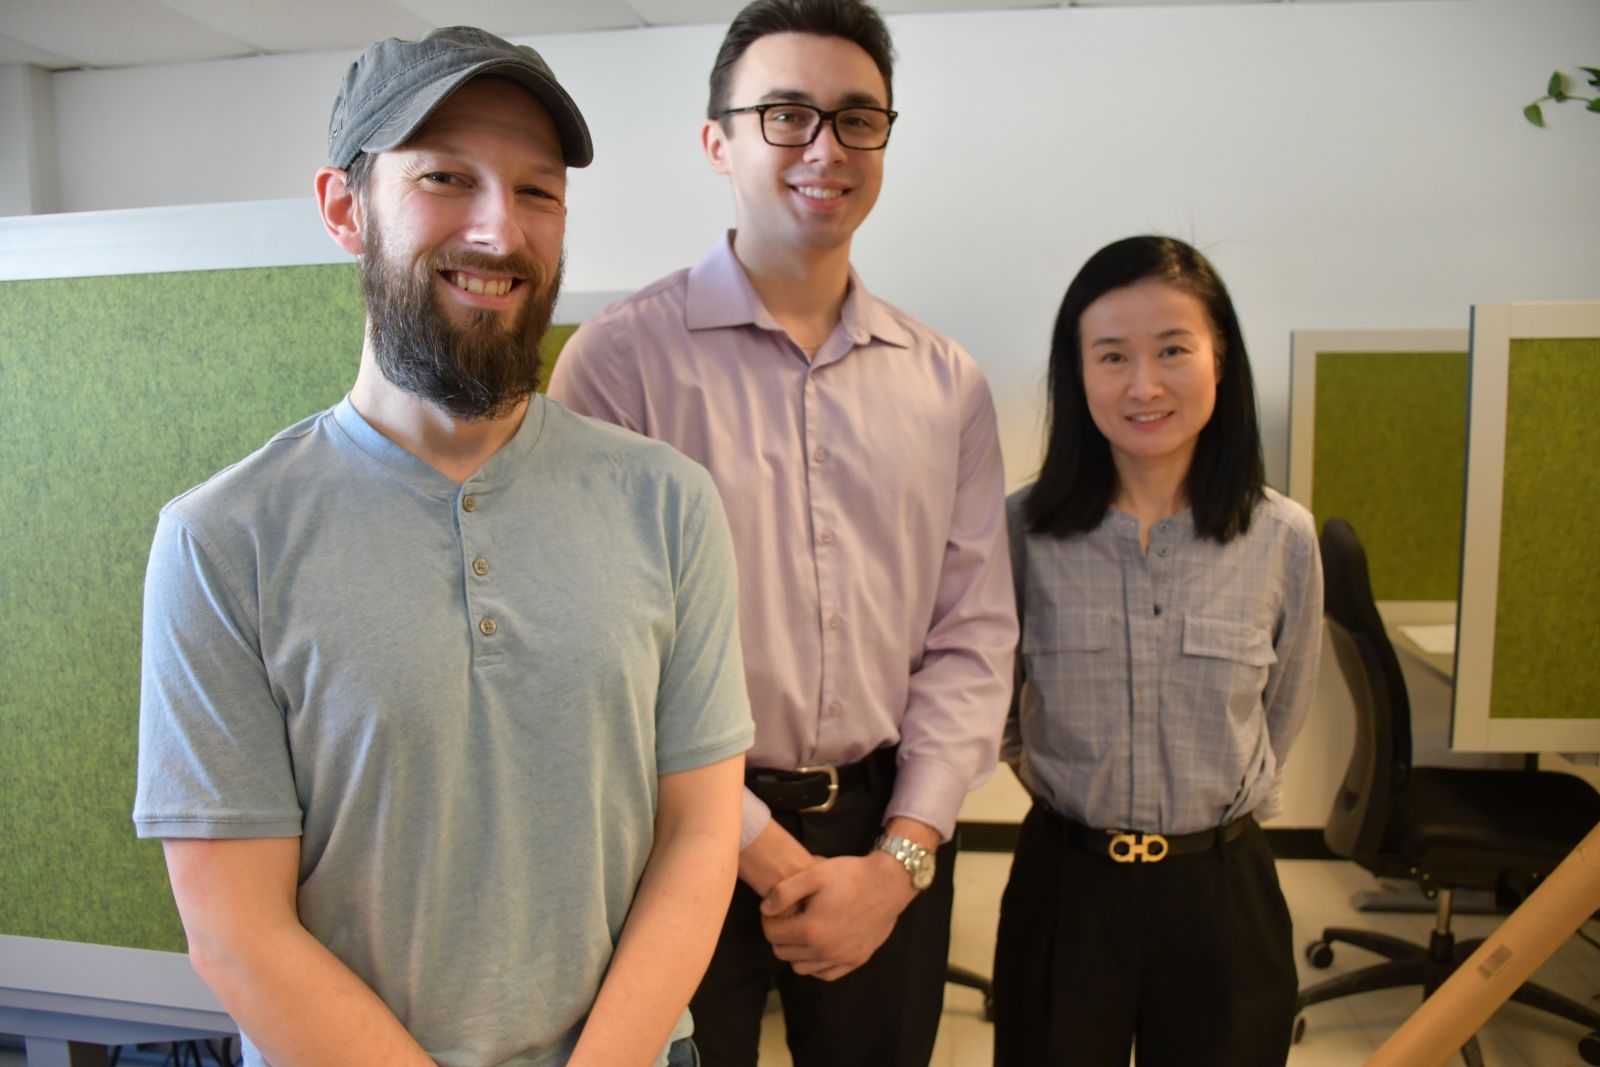 Second year student Dylan Rietze (middle) worked with both Drs. Christian Muise (l) and Ting Hu (r) (School of Computing).